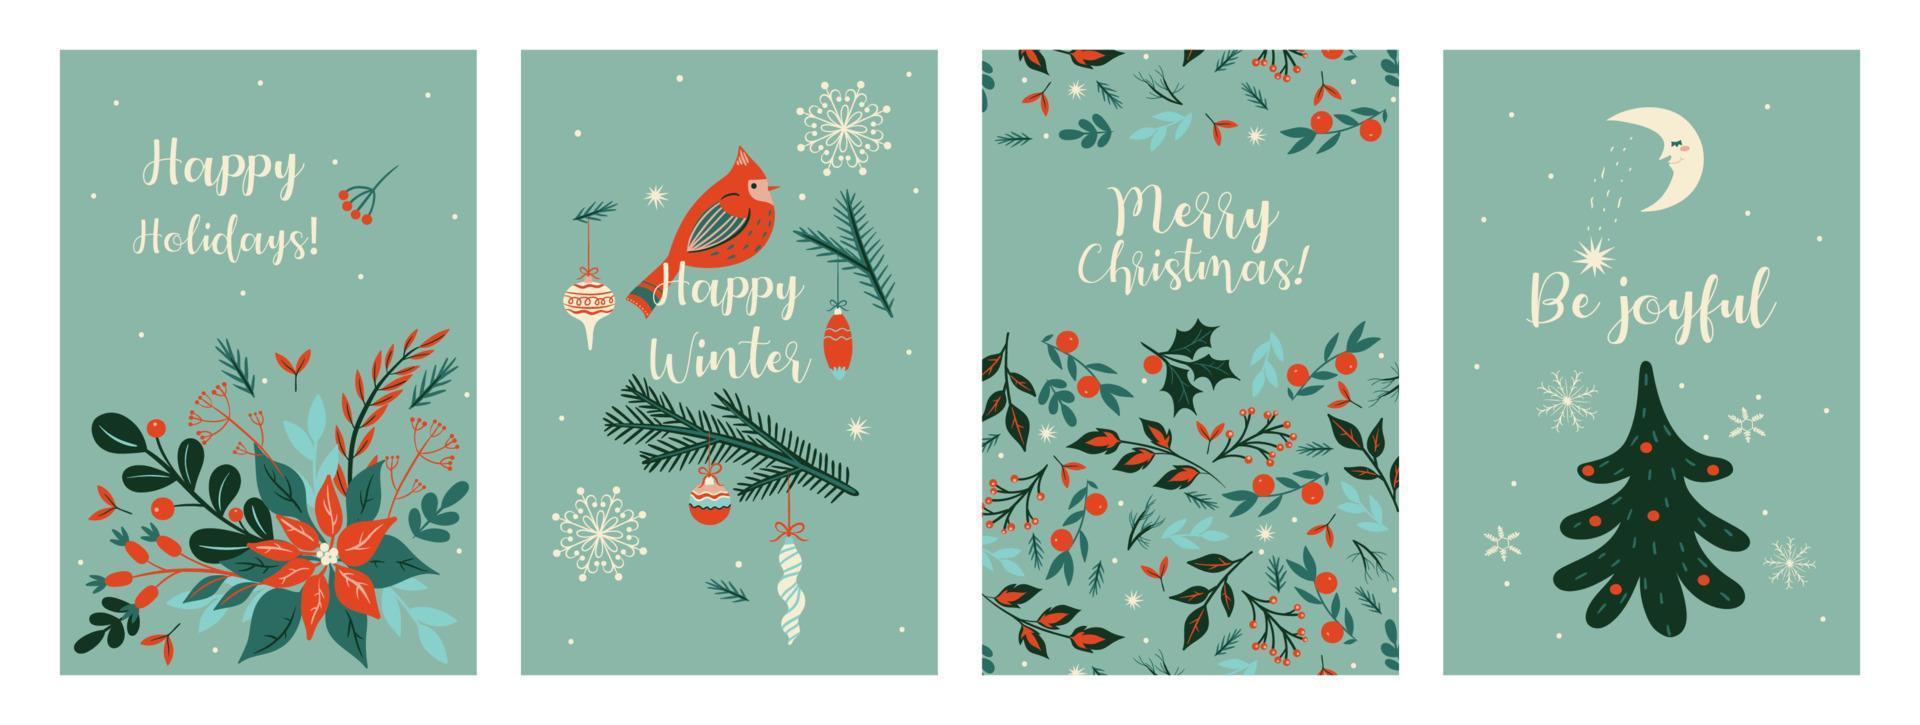 A set of Christmas cards in a single color scheme. Vector graphics.